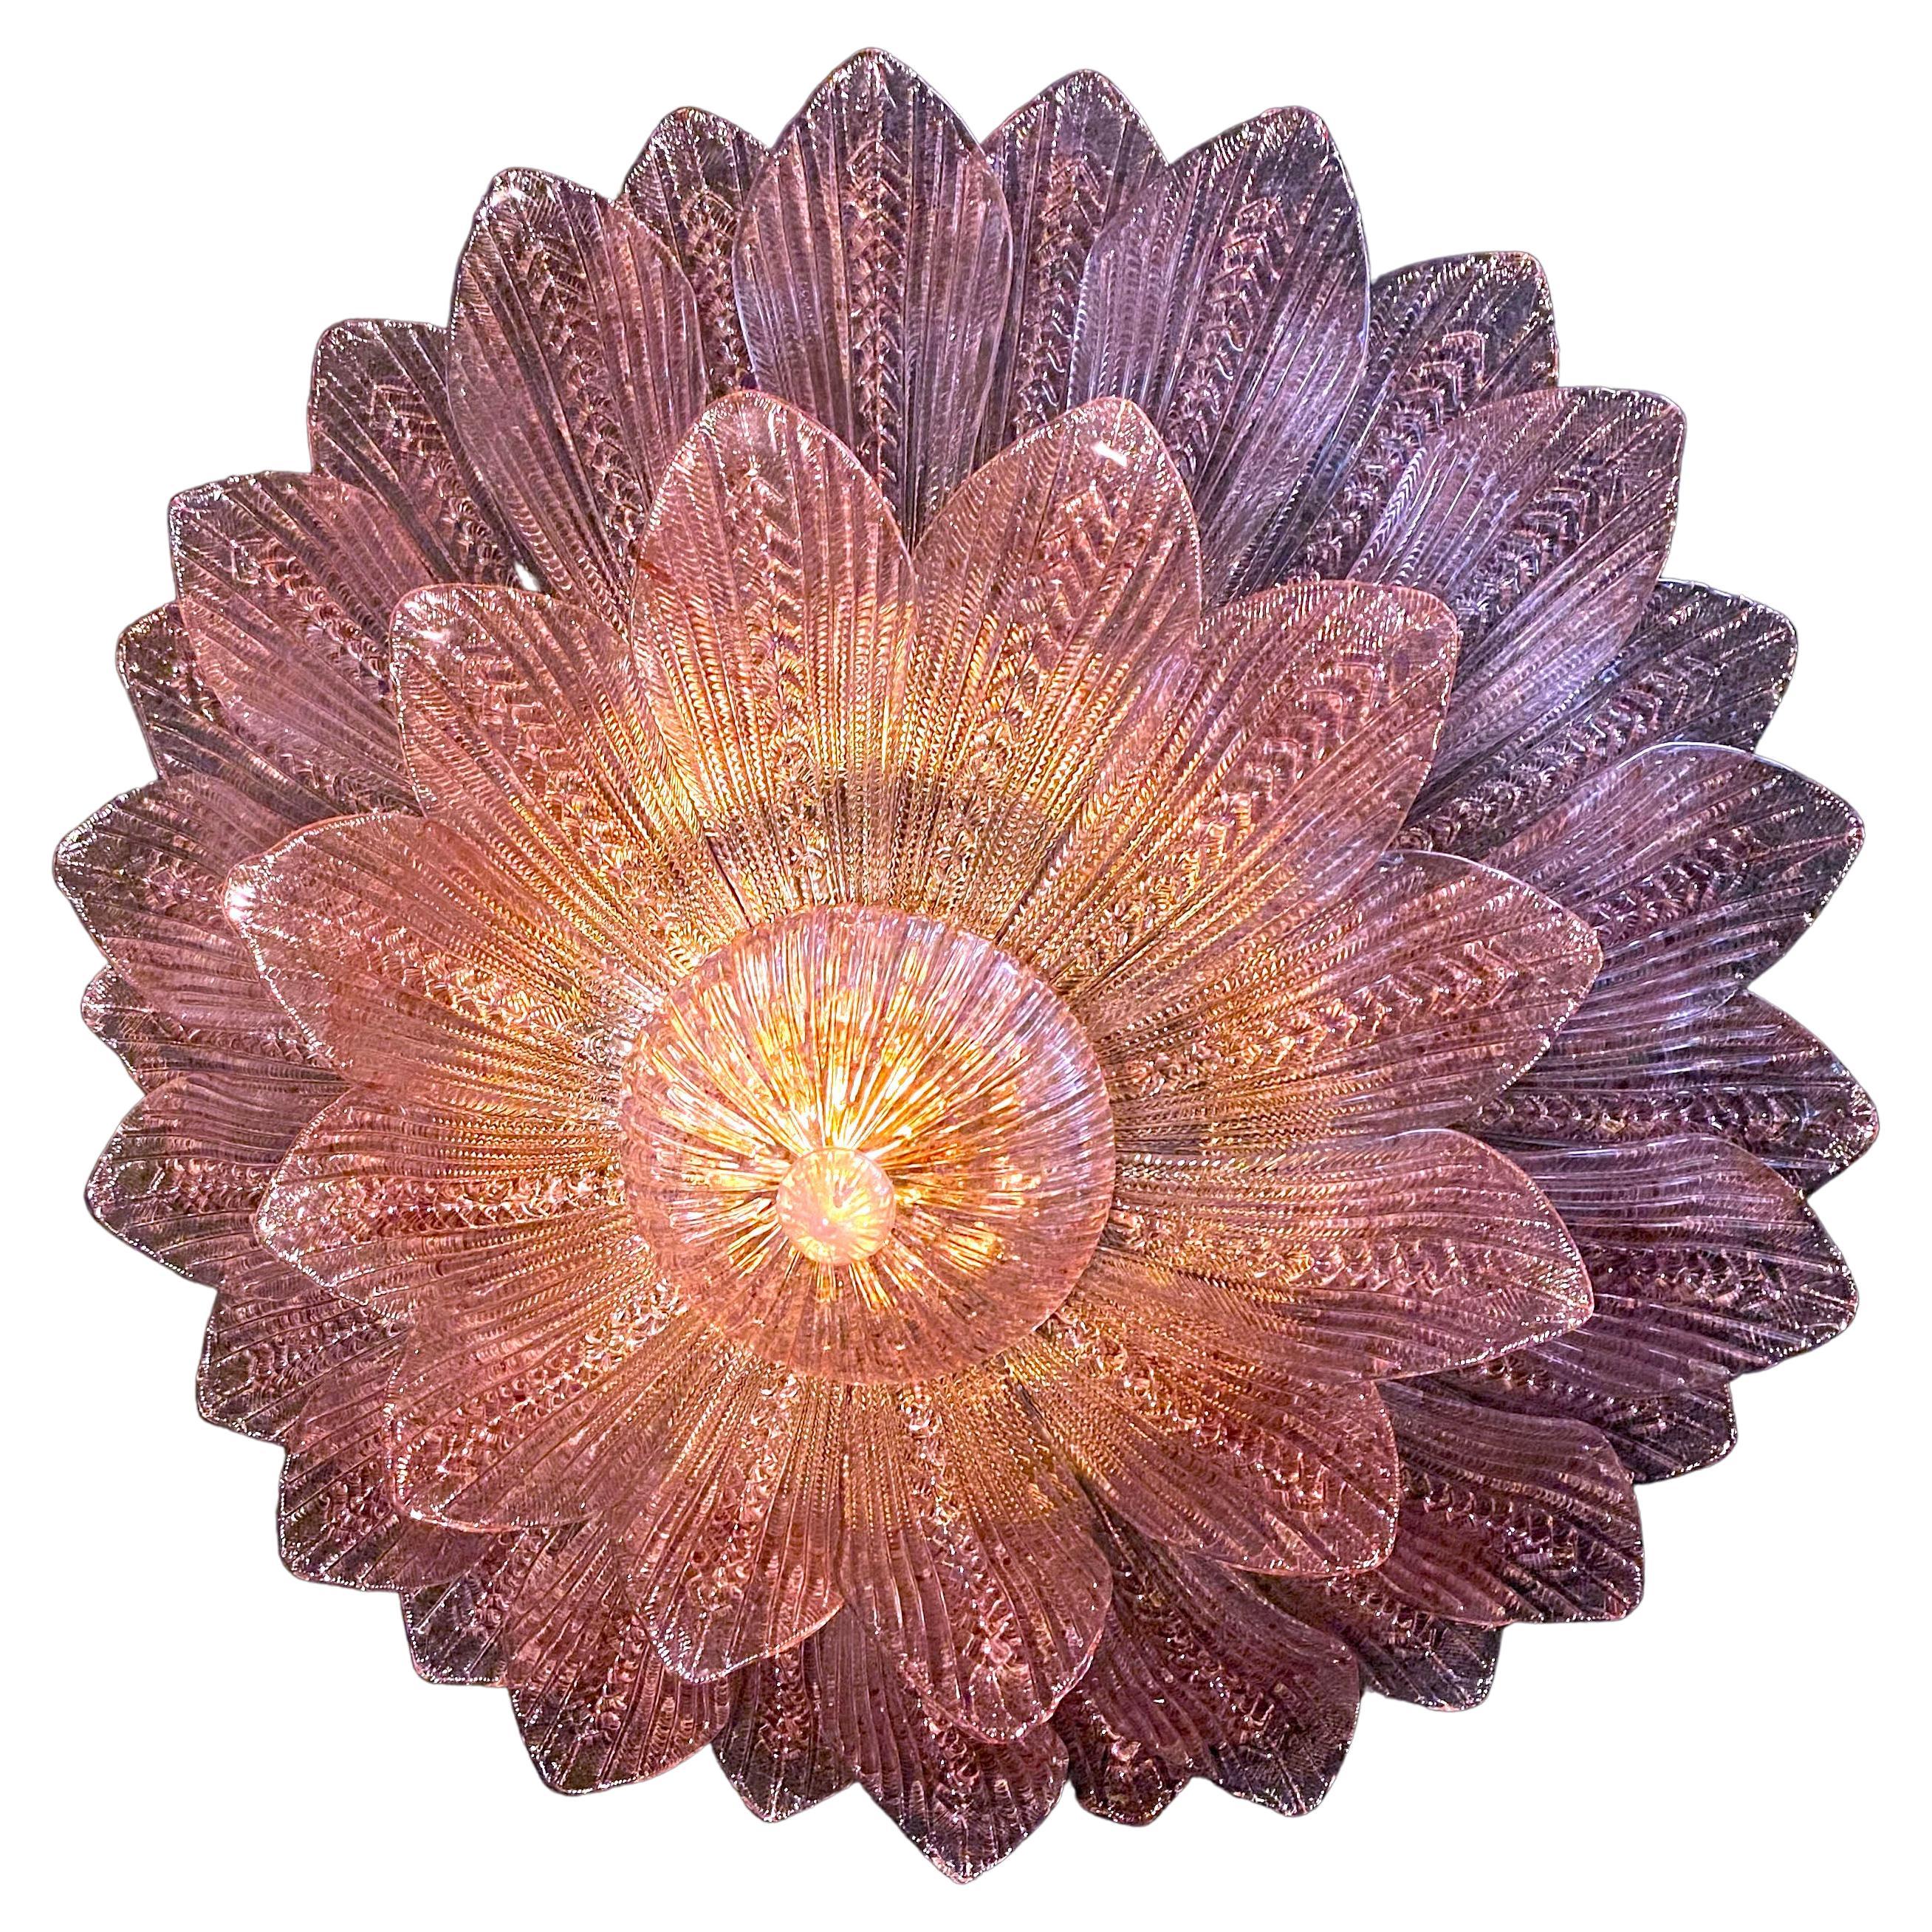 Realized in pure pink amethyst color Murano glass consists of 45 delicious hand-blown leaves.
 The structure is gilt-metal. Five E27 lights spread a magical light.

Available also a pair.
This light fixture can be disassembled and the leaves